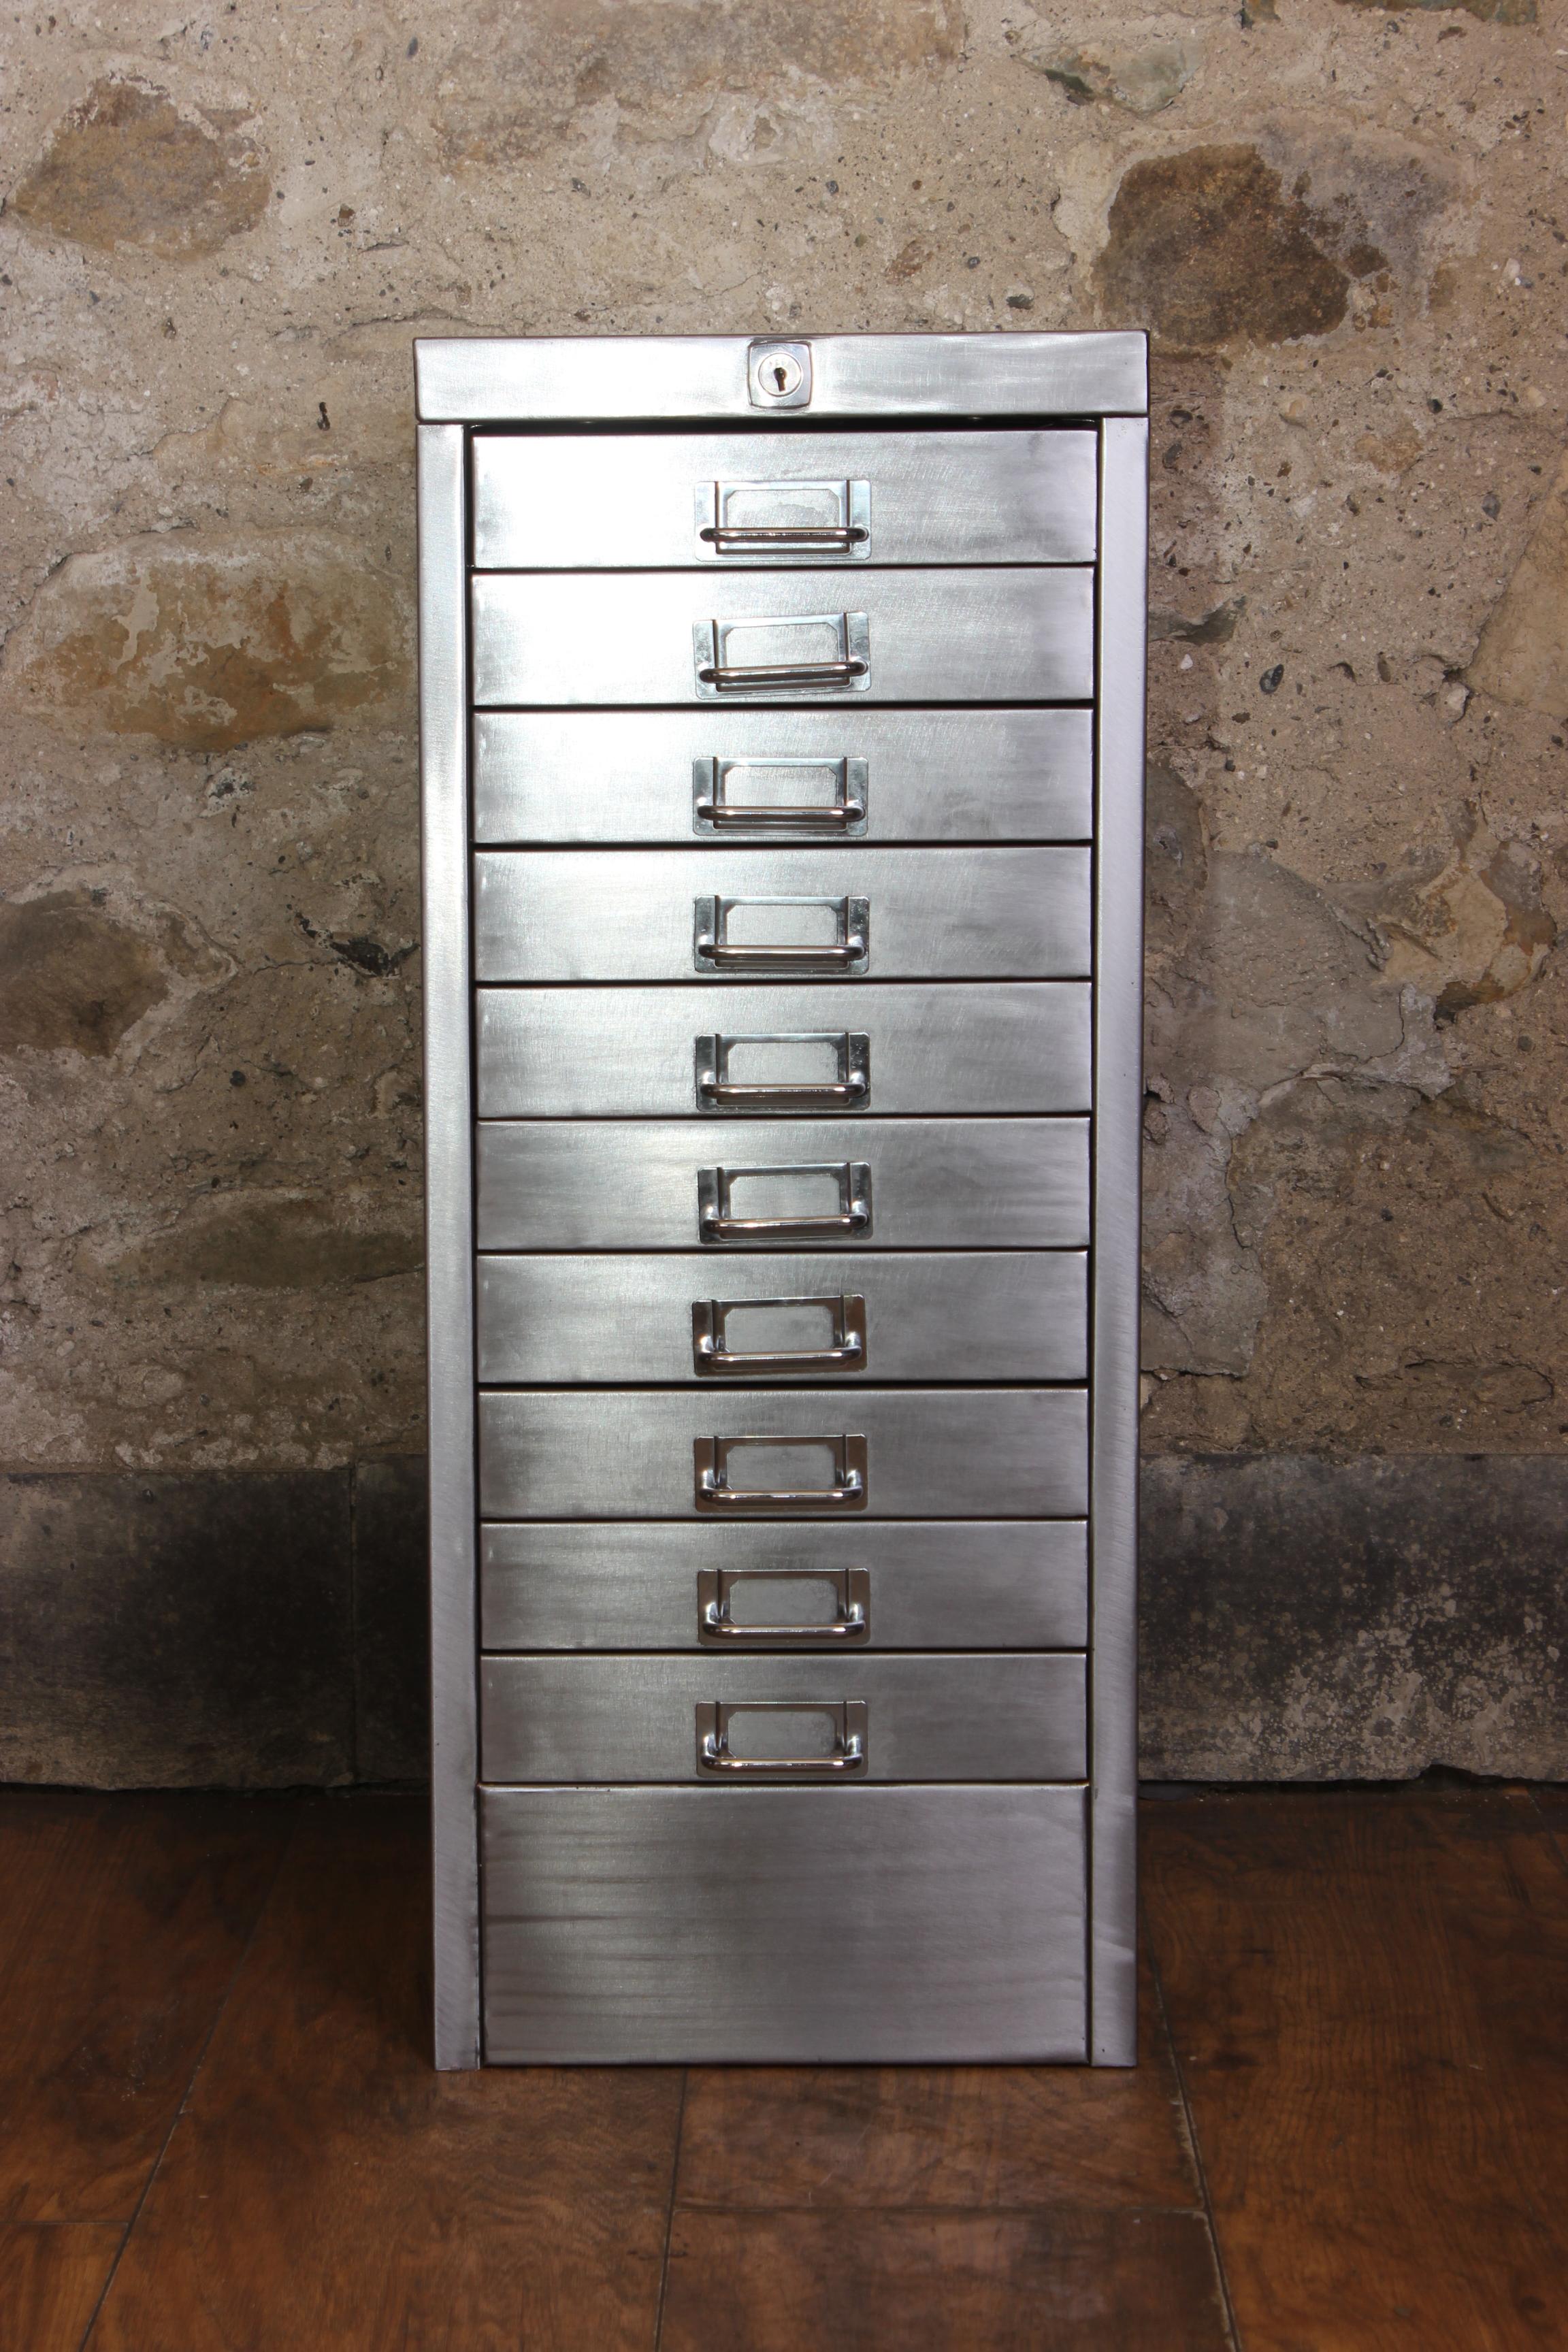 A stunning 1980s Industrial stripped metal 10-drawer filing cabinet. This impressive A4/Letter size Industrial Design piece has been stripped back to bare metal and was manufactured in the United Kingdom. All the drawers run smoothly and have label